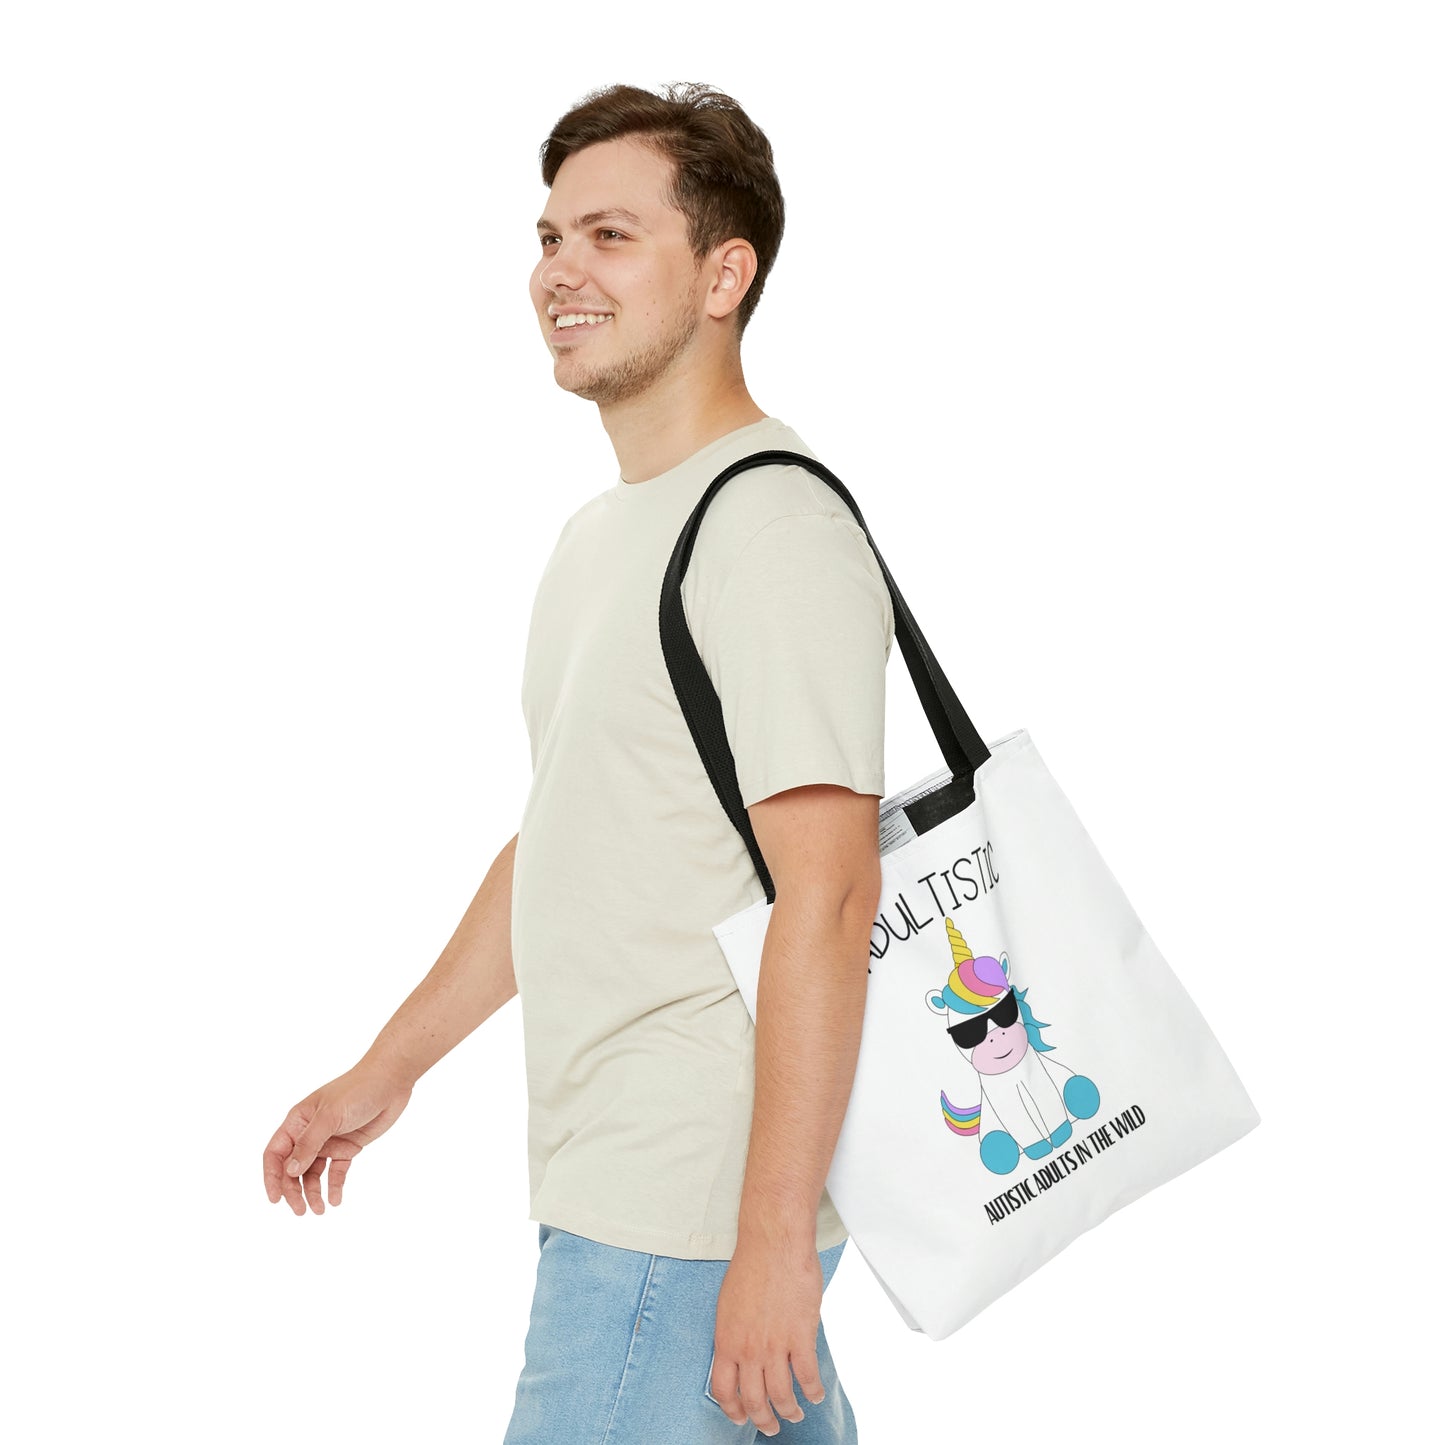 "Autistic Adults In The Wild" Shady Unicorn Tote Bag in 3 sizes